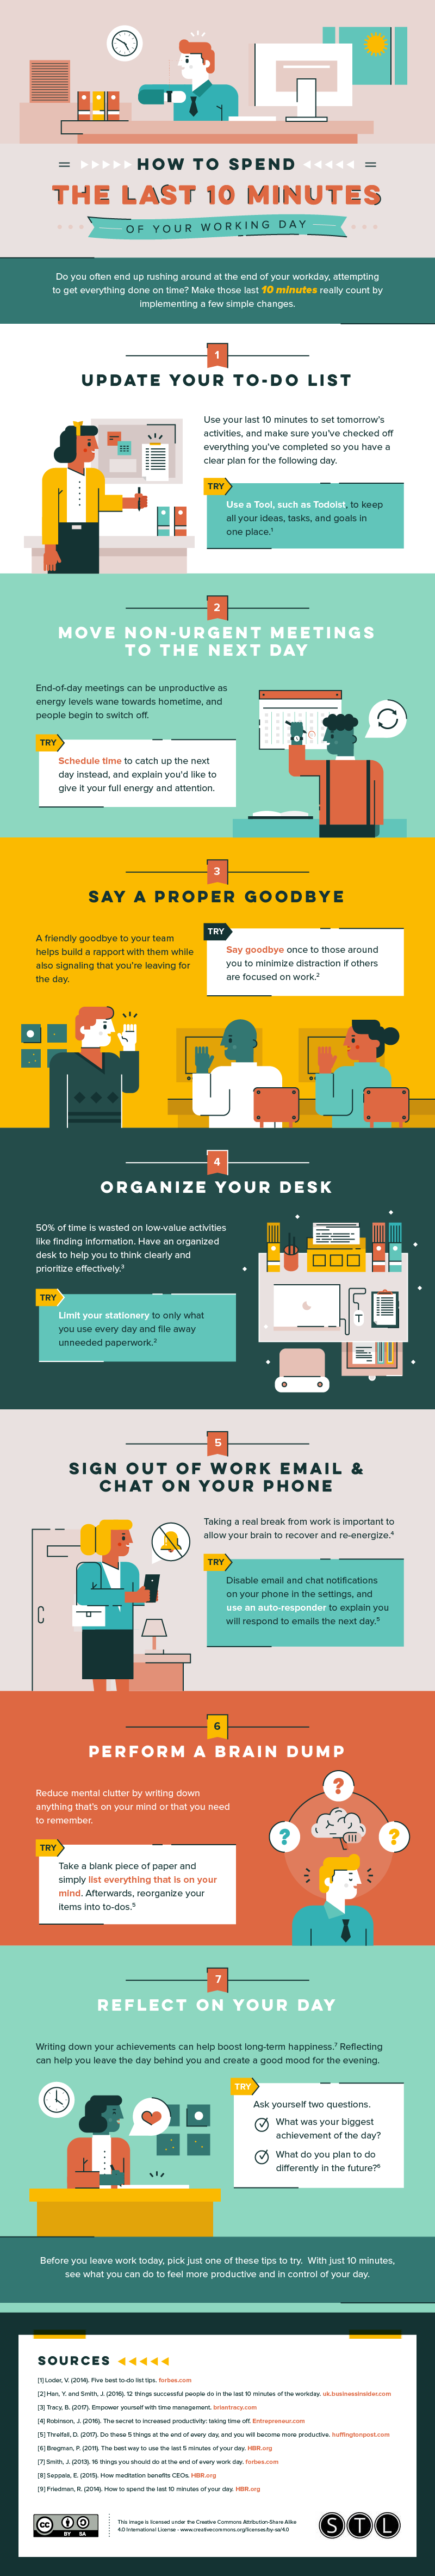 How to Spend The Last 10 Minutes of Your Working Day - #infographic